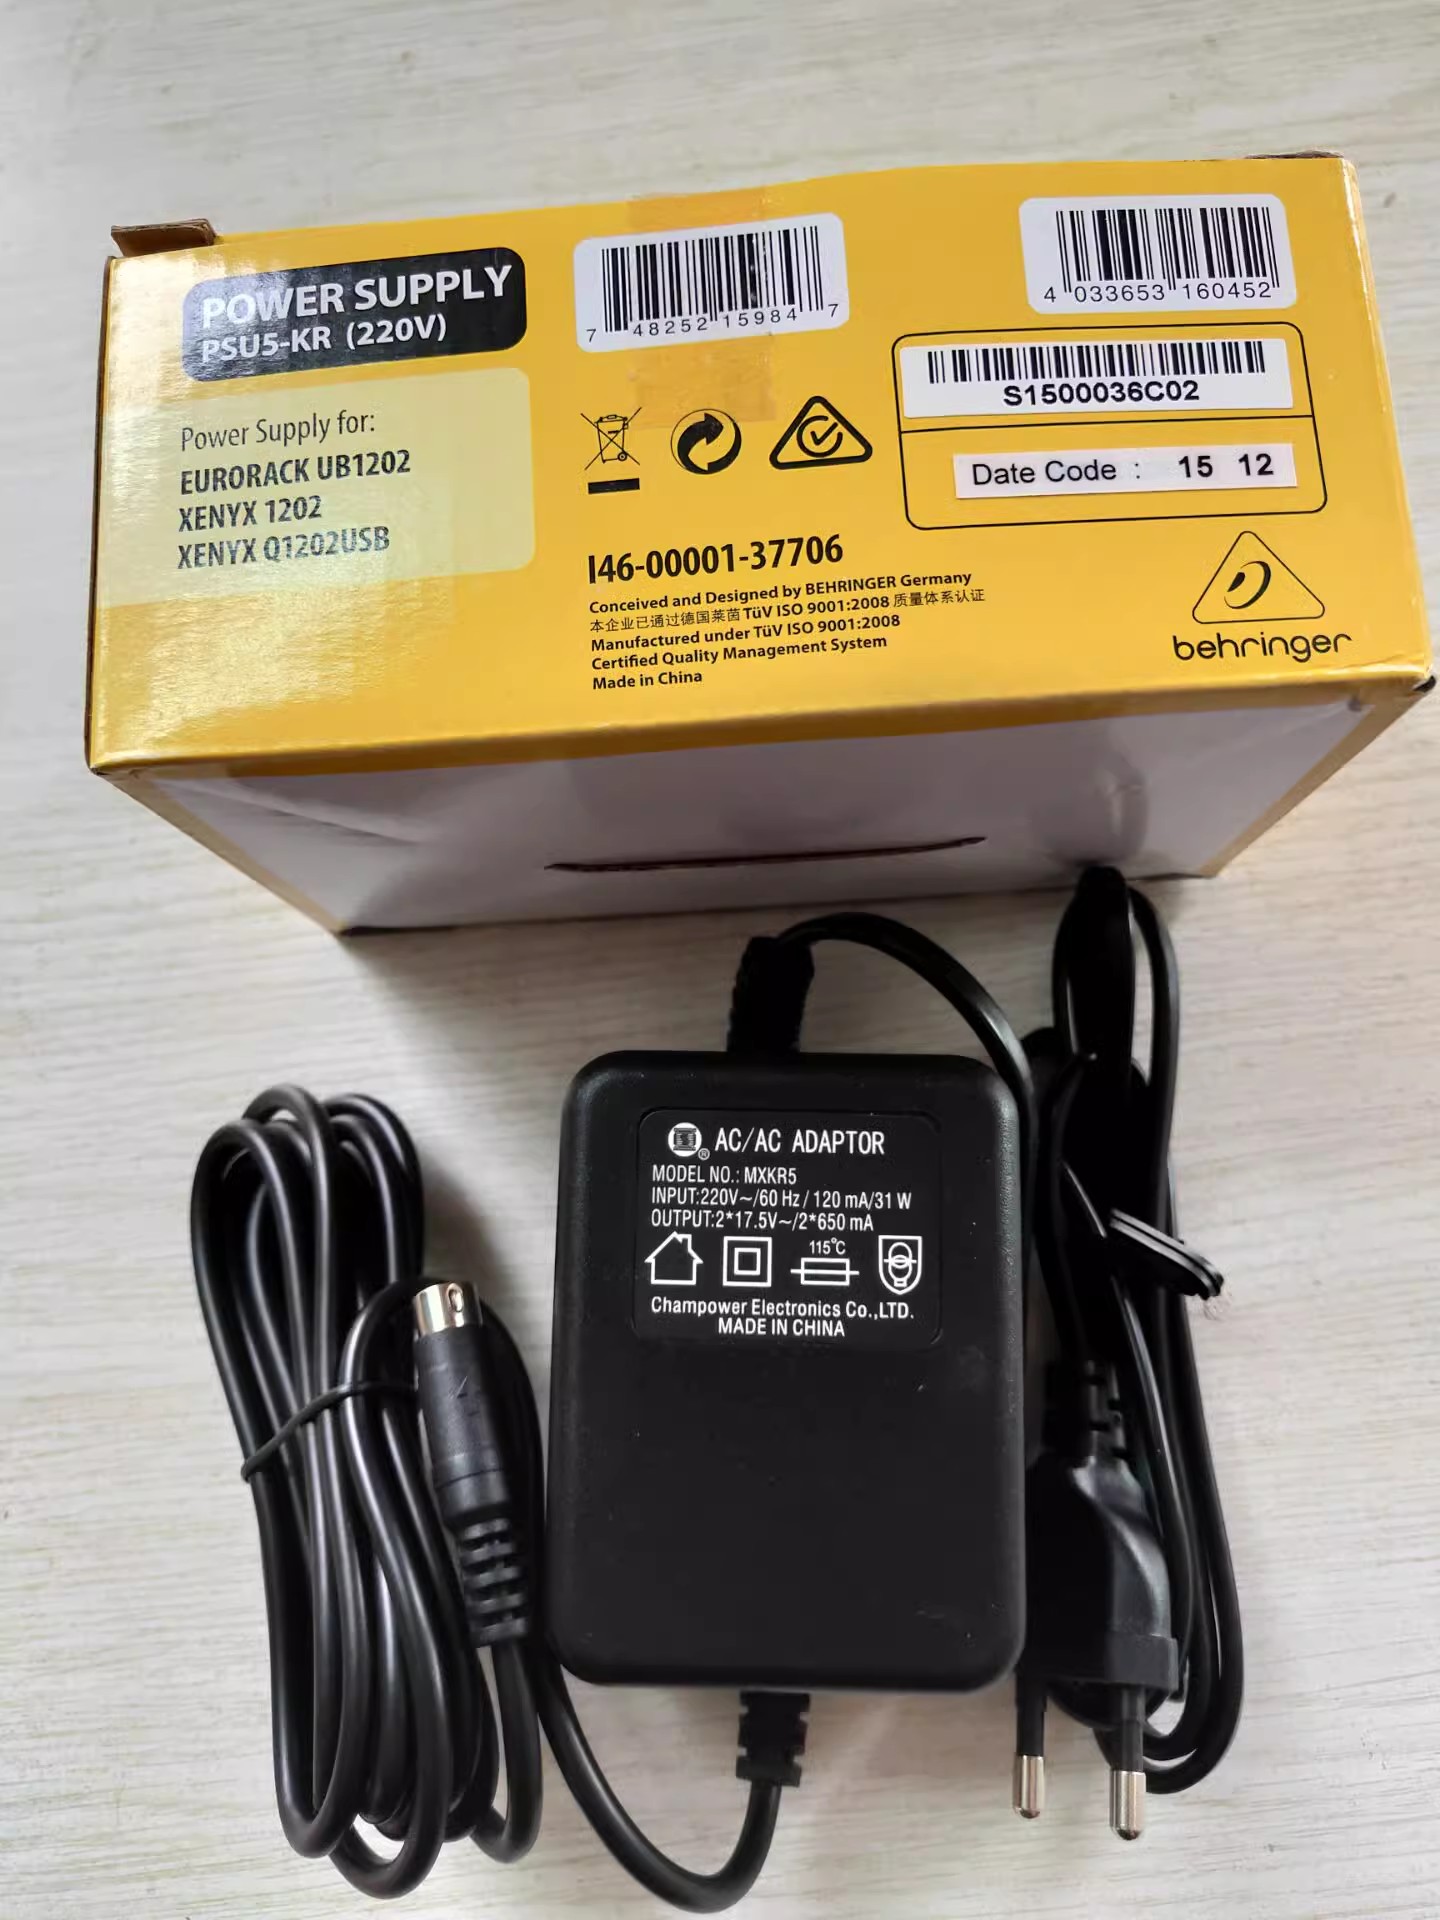 *Brand NEW* BEHRINGER XENYX1202 MKR5 2*17.5V 2*650MA AC DC ADAPTHE POWER Supply